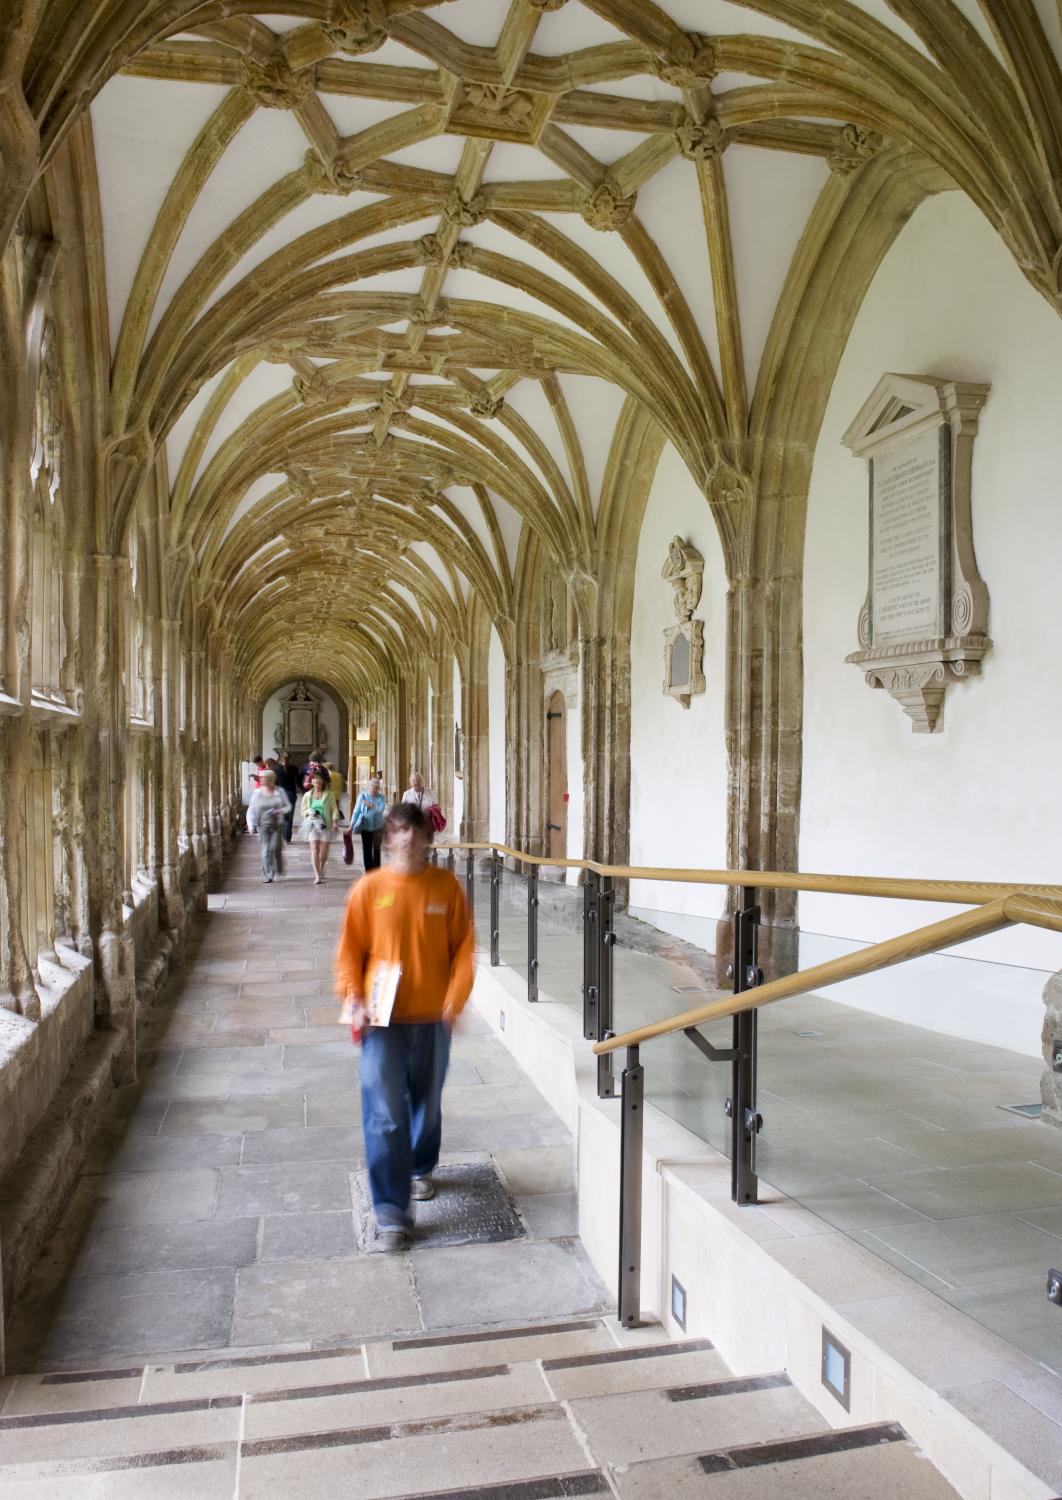 Interior view of people walking along one of the cloisters of Wells Cathedral